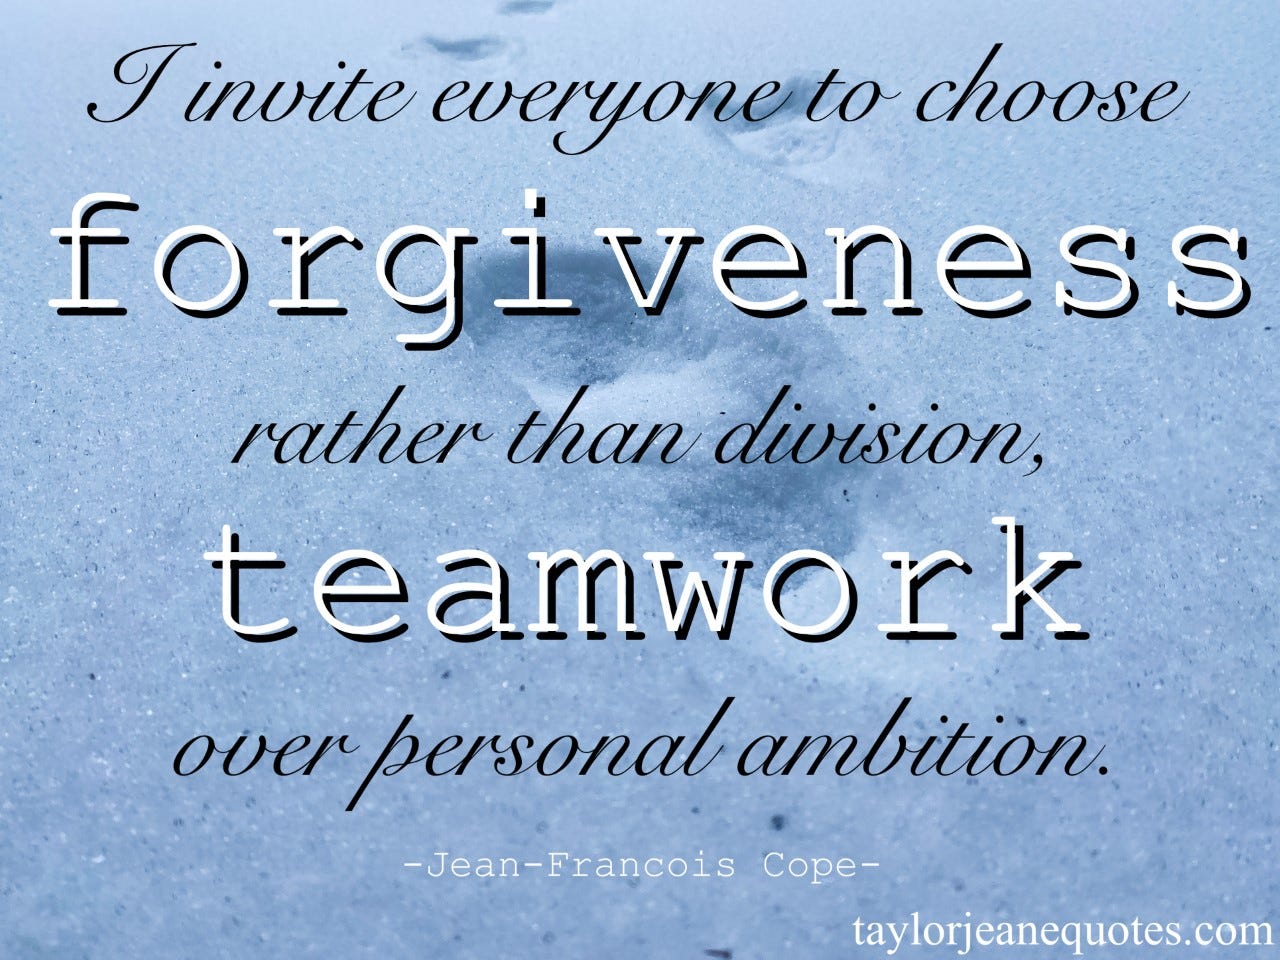 taylor jeane quotes, taylor jeane, taylor wilson, quote of the day, quote of the day emails free, jean-francois cope, jean-francois cope quotes, motivational quotes, inspirational quotes, positive quotes, life quotes, uplifting quotes, sweet quotes, forgiveness quotes, forgive quotes, teamwork quotes, love quotes, life quotes, ambition quotes, kindness quotes, quotes for a bad day, uplifting quotes, positive quotes, unity quotes